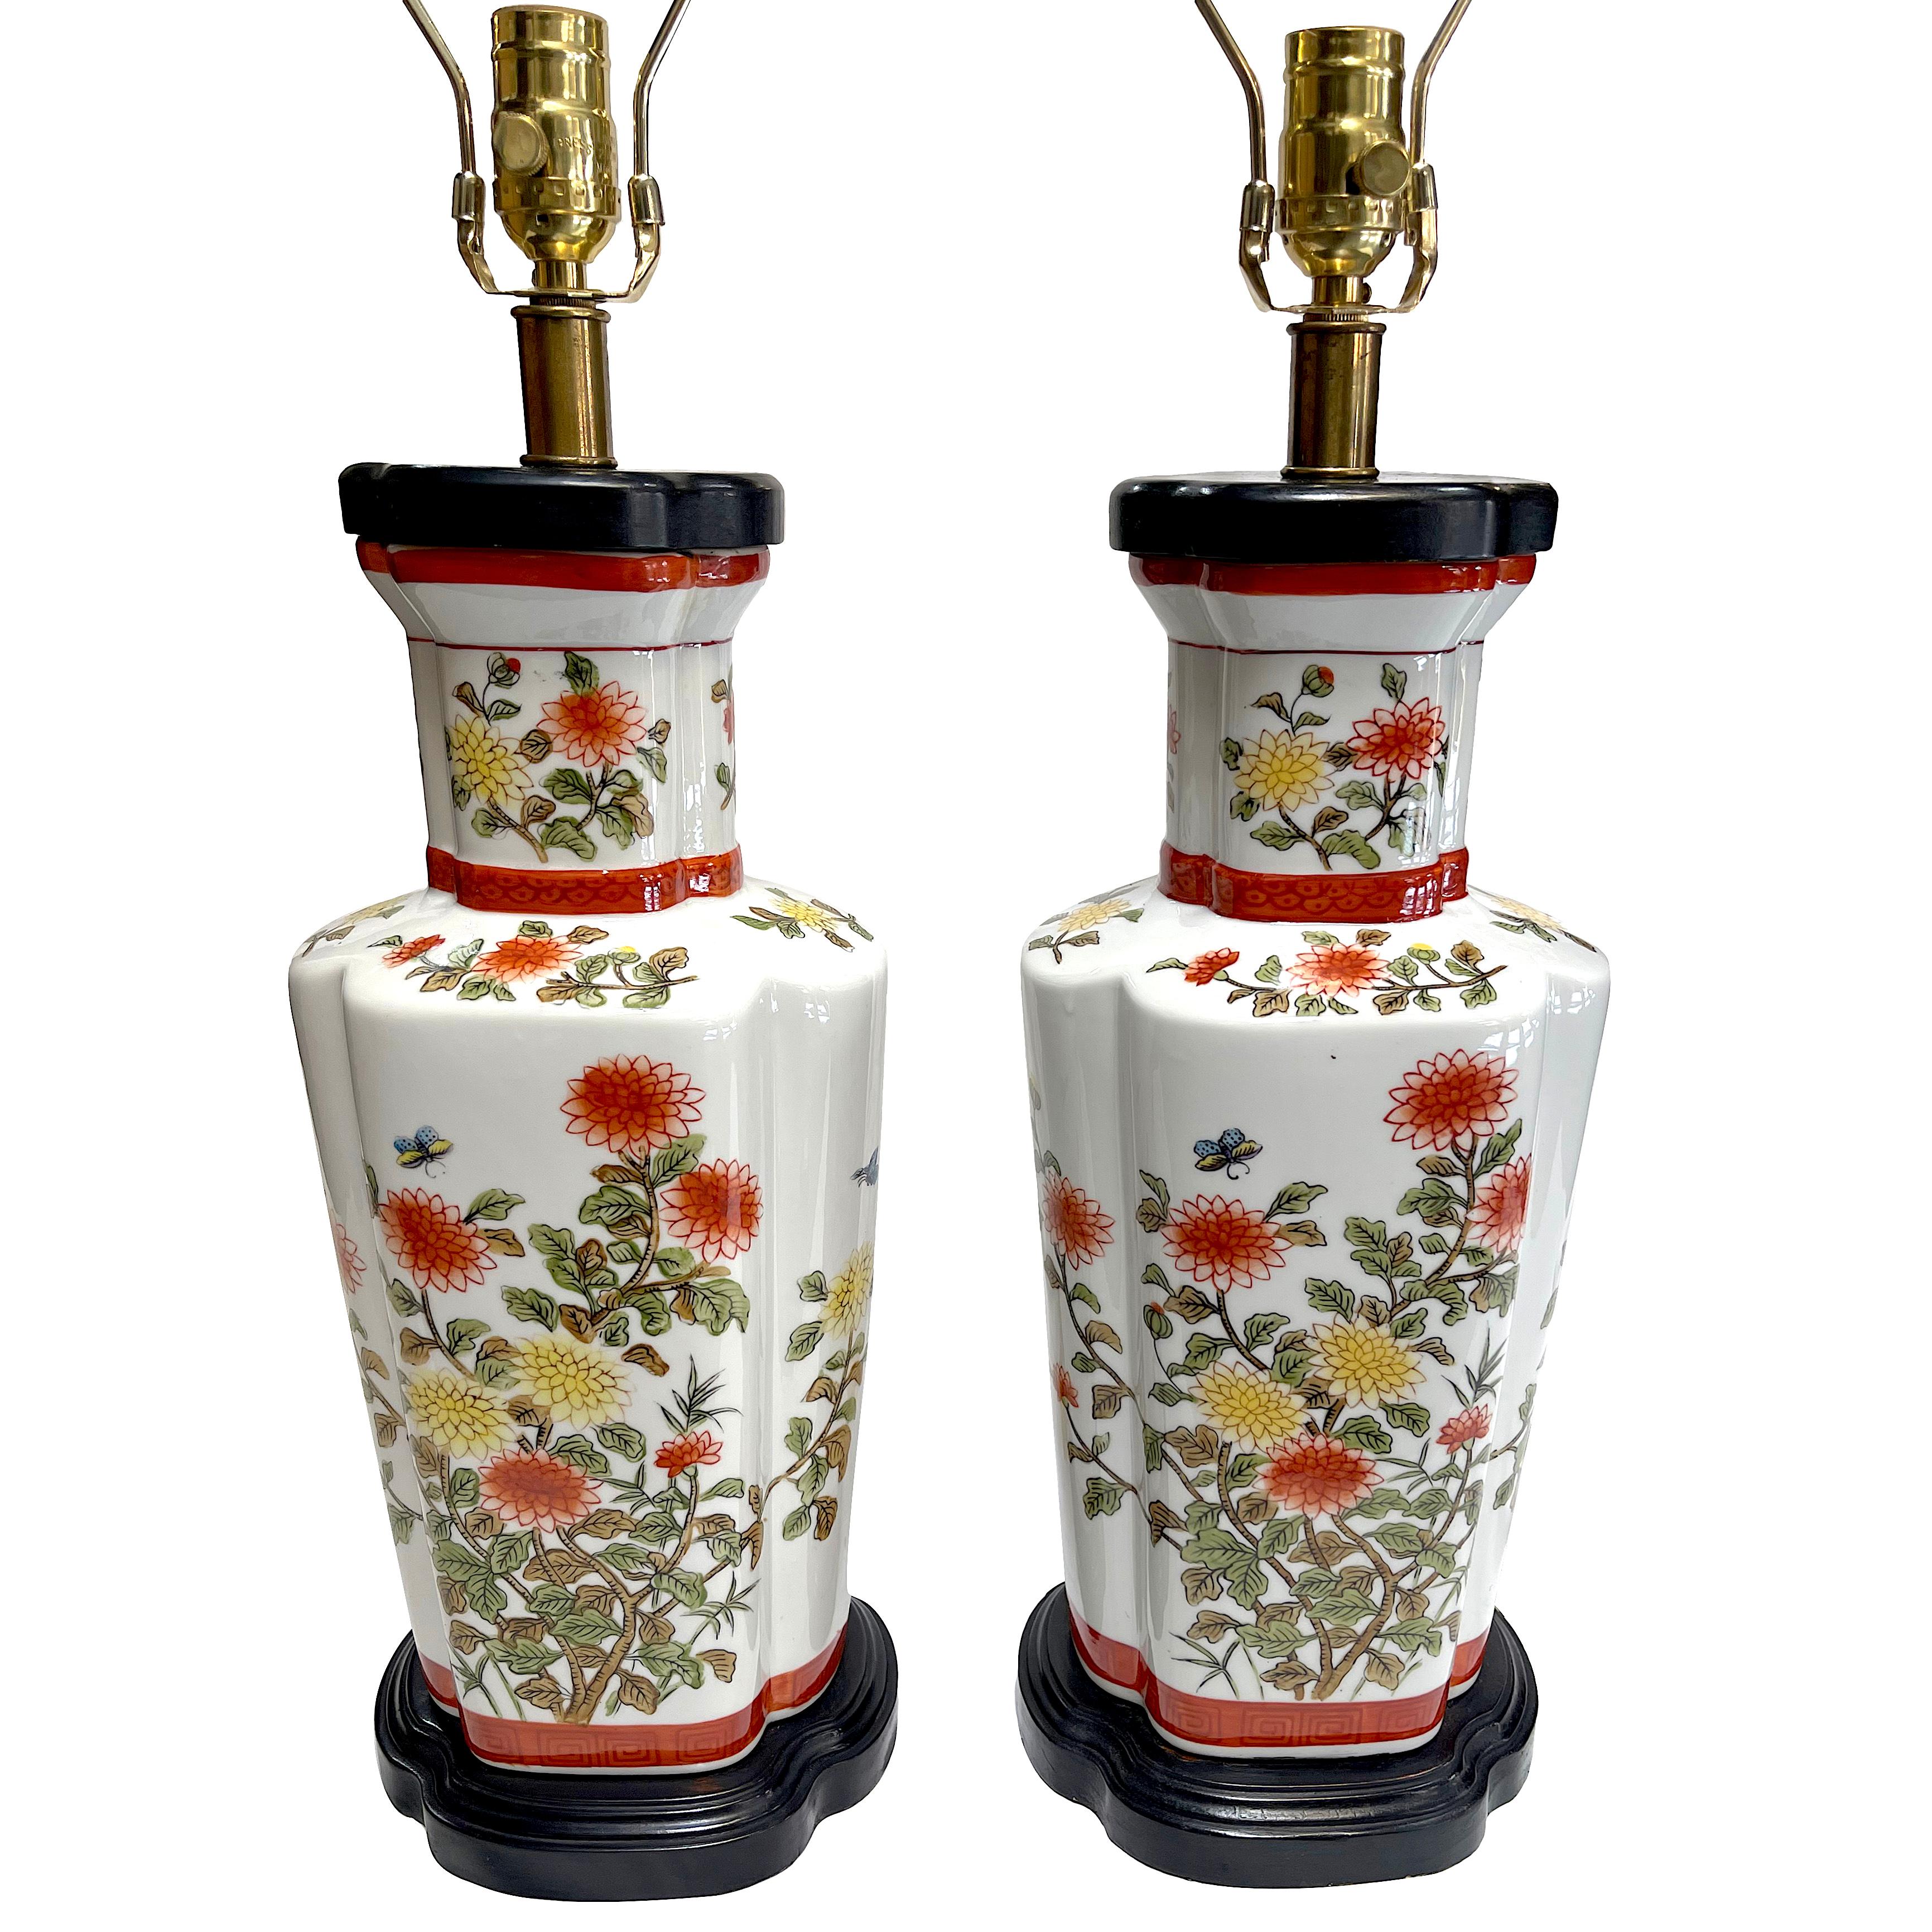 Pair of English circa 1920's porcelain table lamps with Chinoiserie decoration and ebonized wood bases.

Measurements:
Height: 16.5